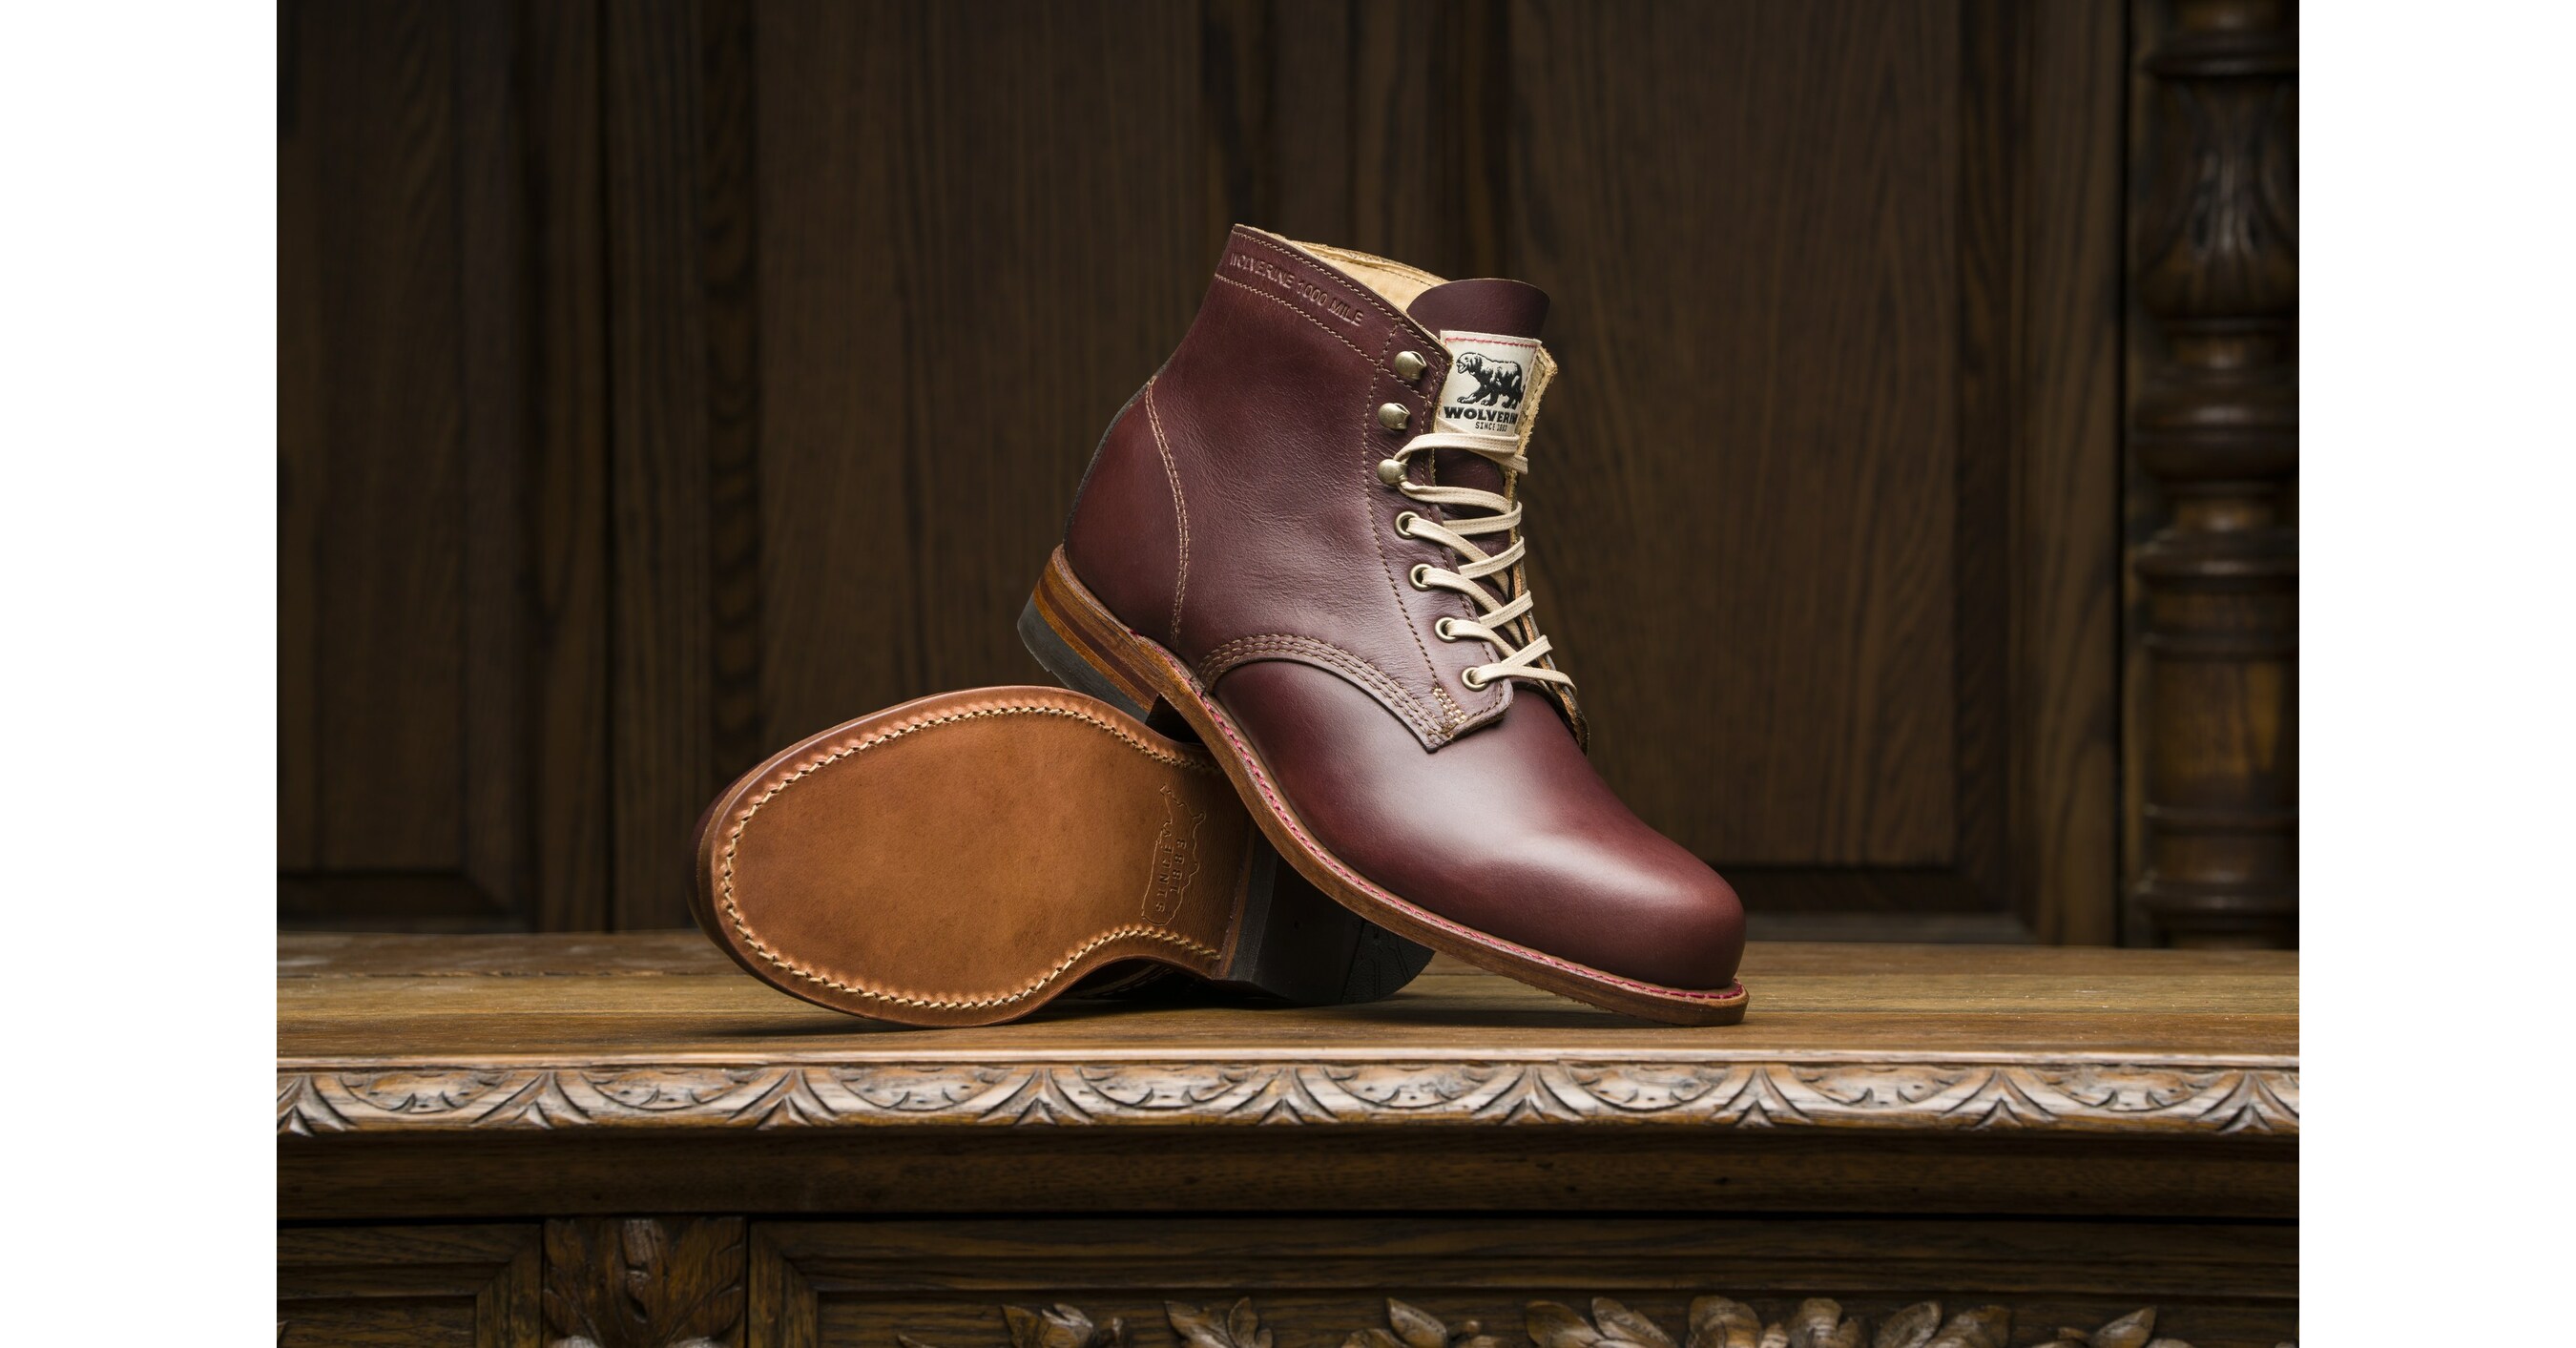 Red Wing Shoes opening new store in Grand Island